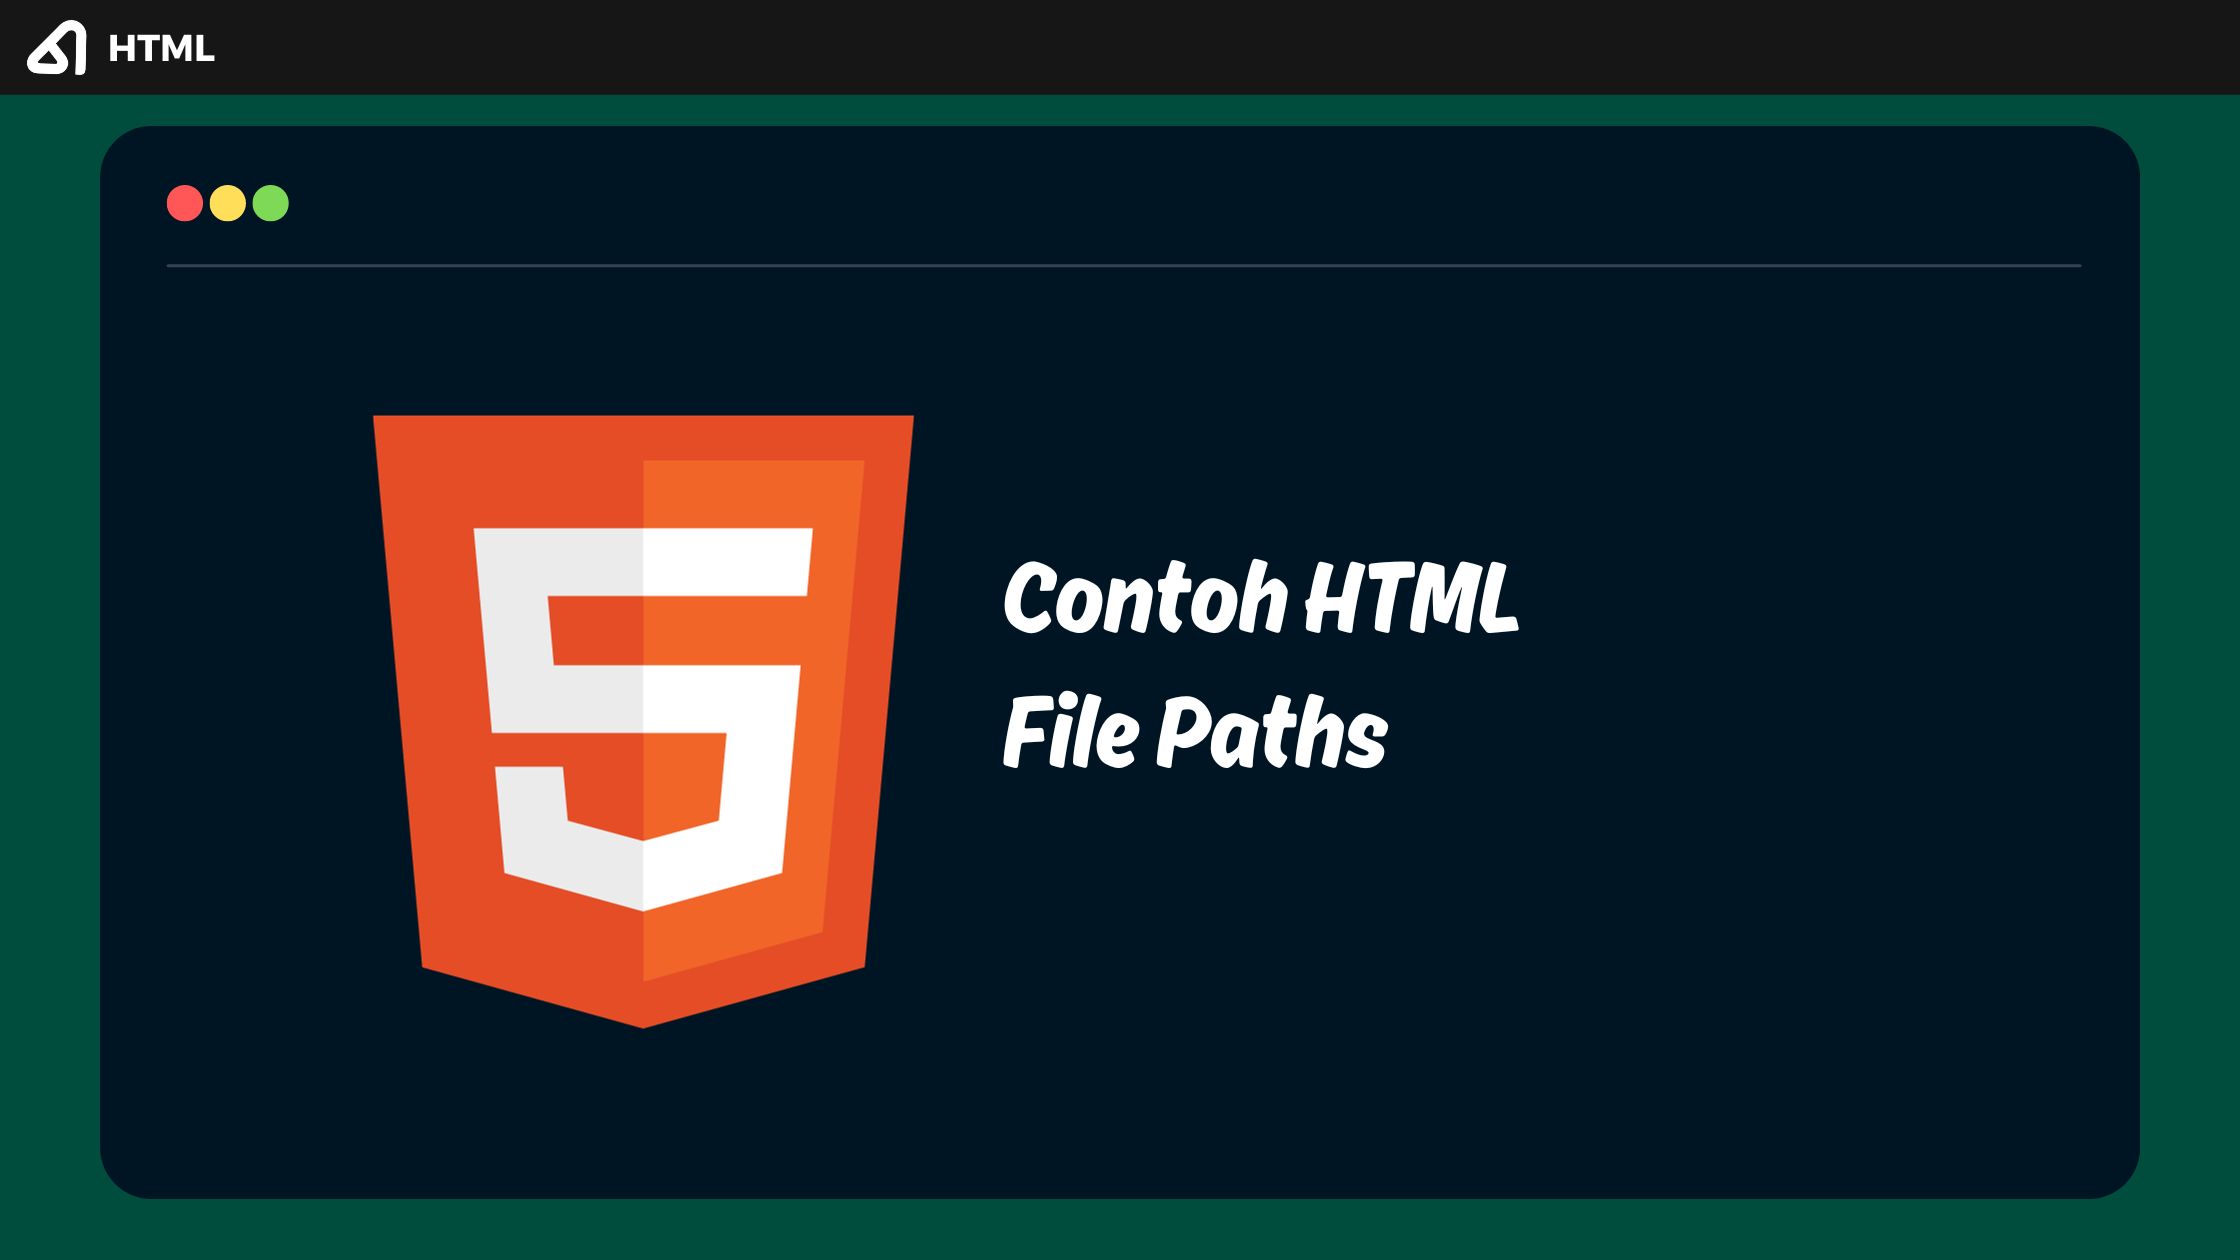 Contoh HTML File Paths